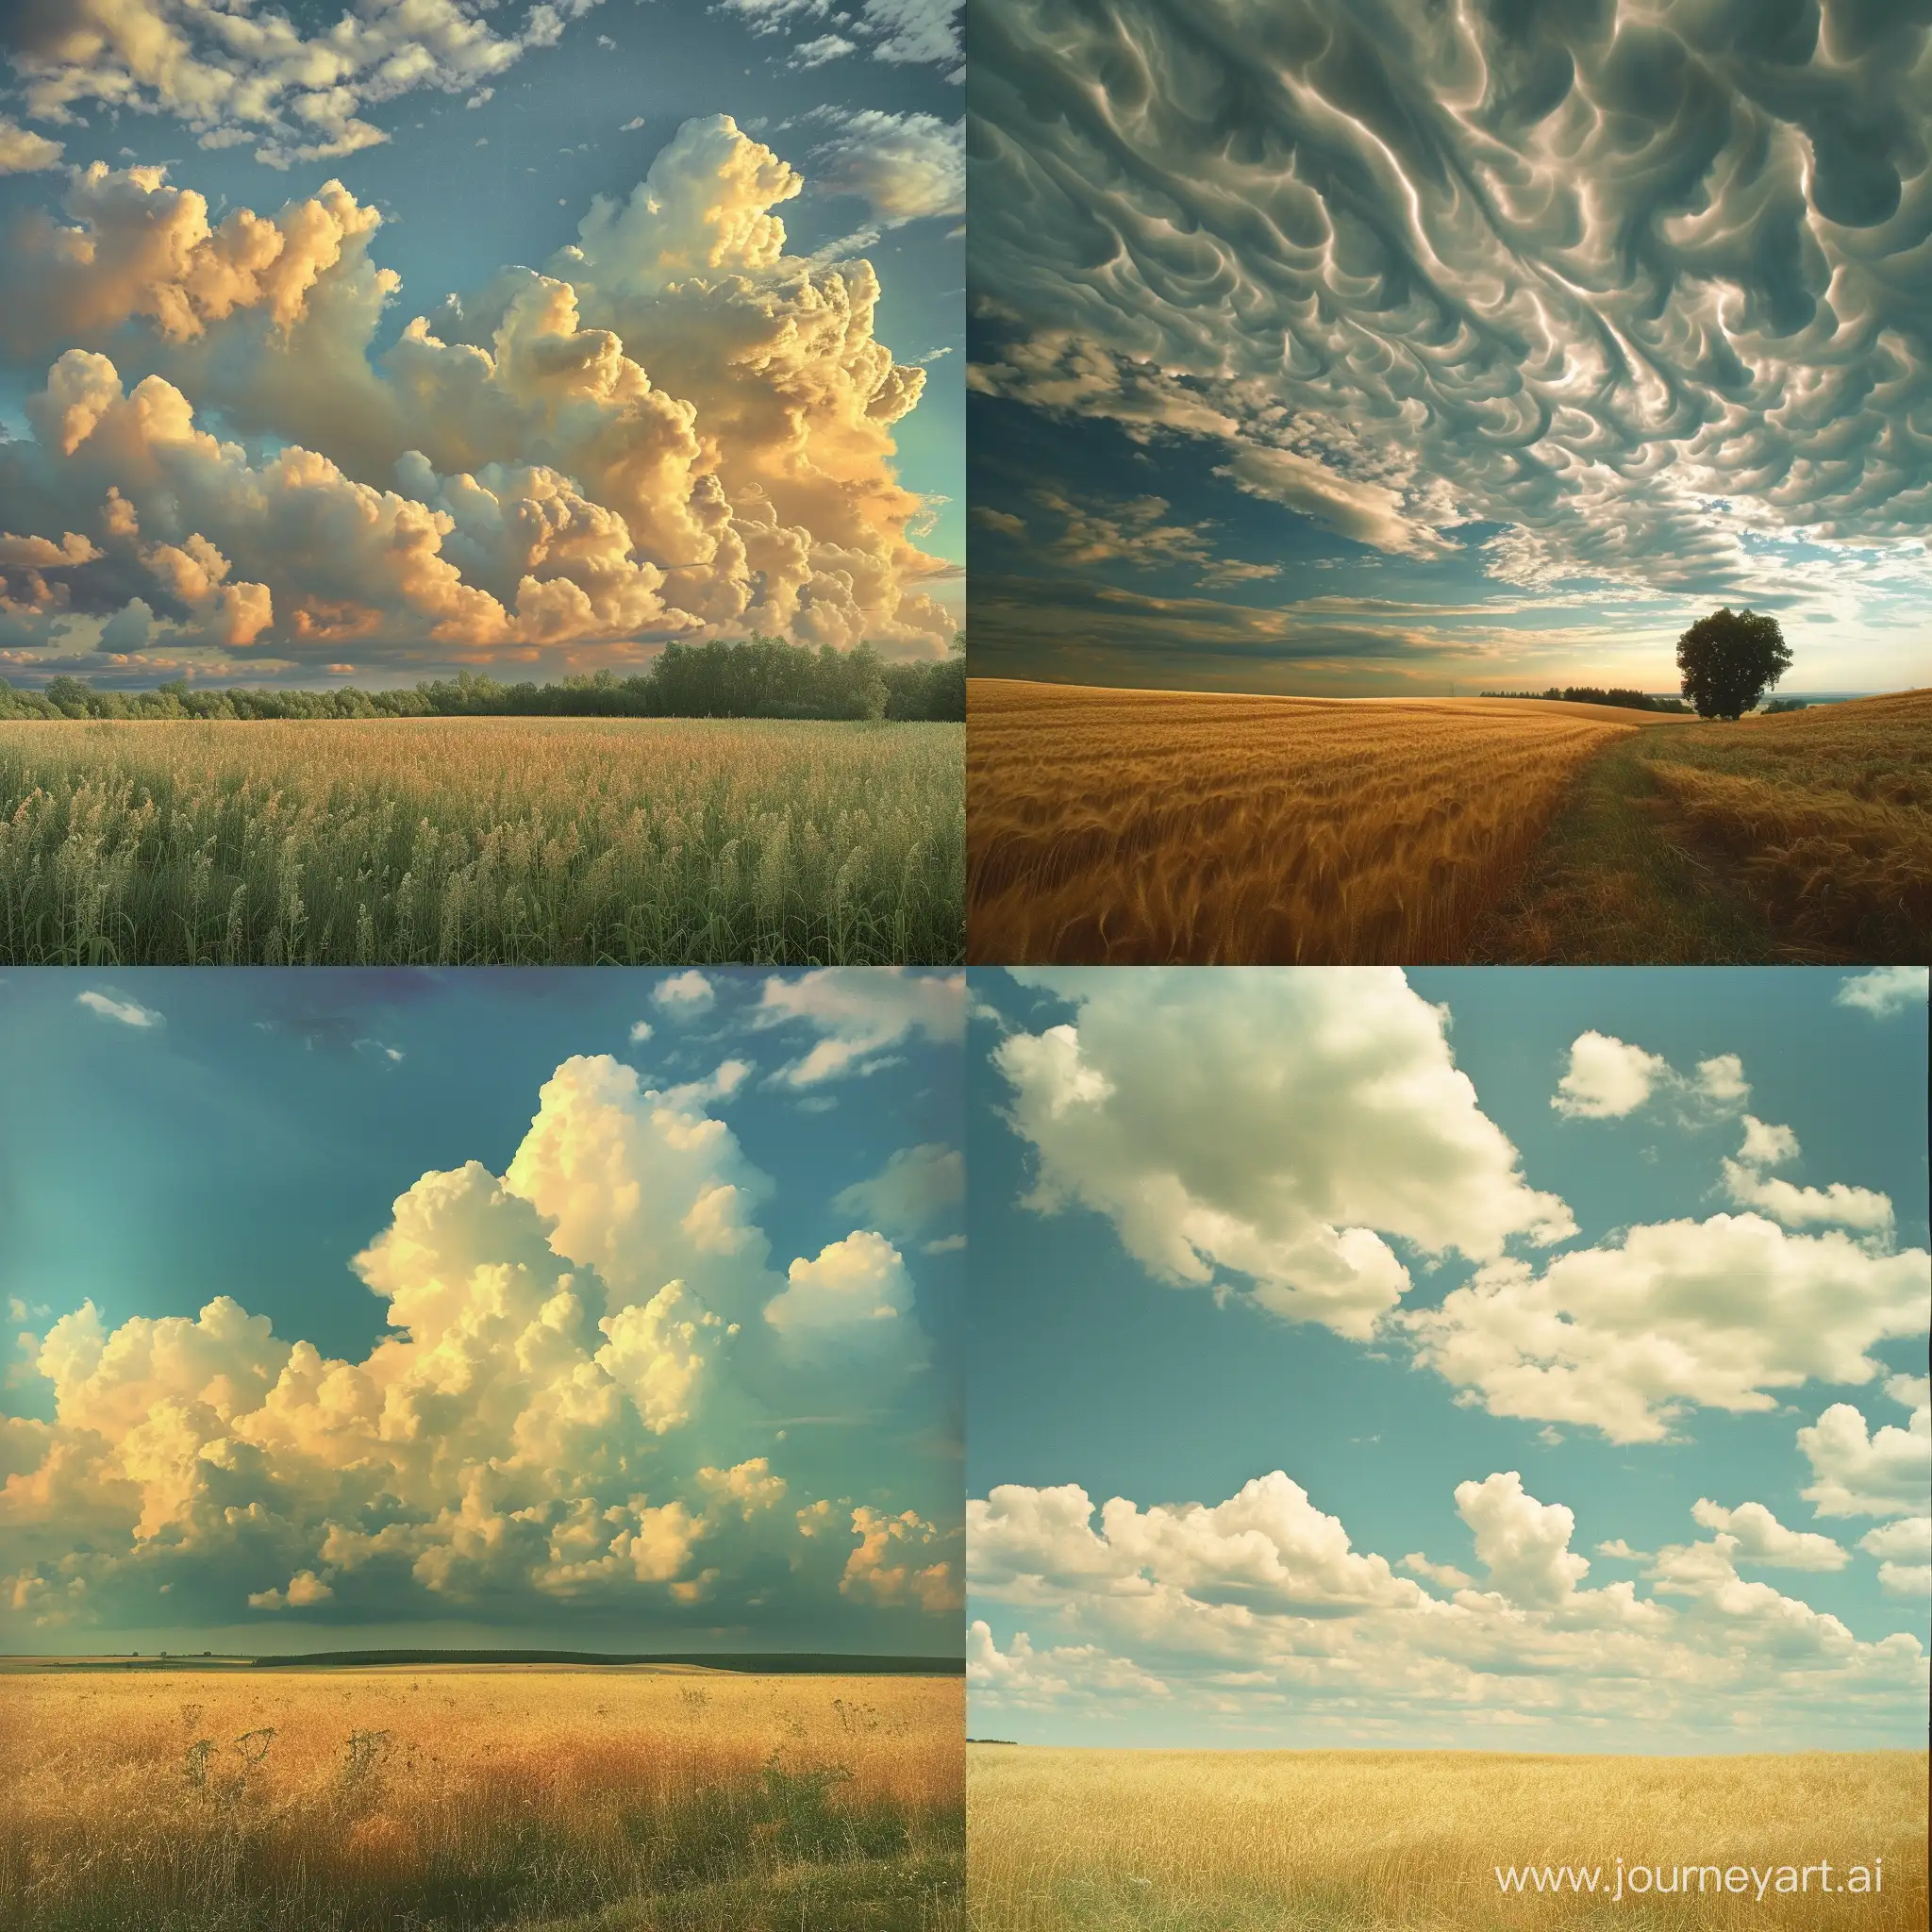 Vibrant-Summer-Sky-Over-Lush-Field-Unique-Cloud-Formations